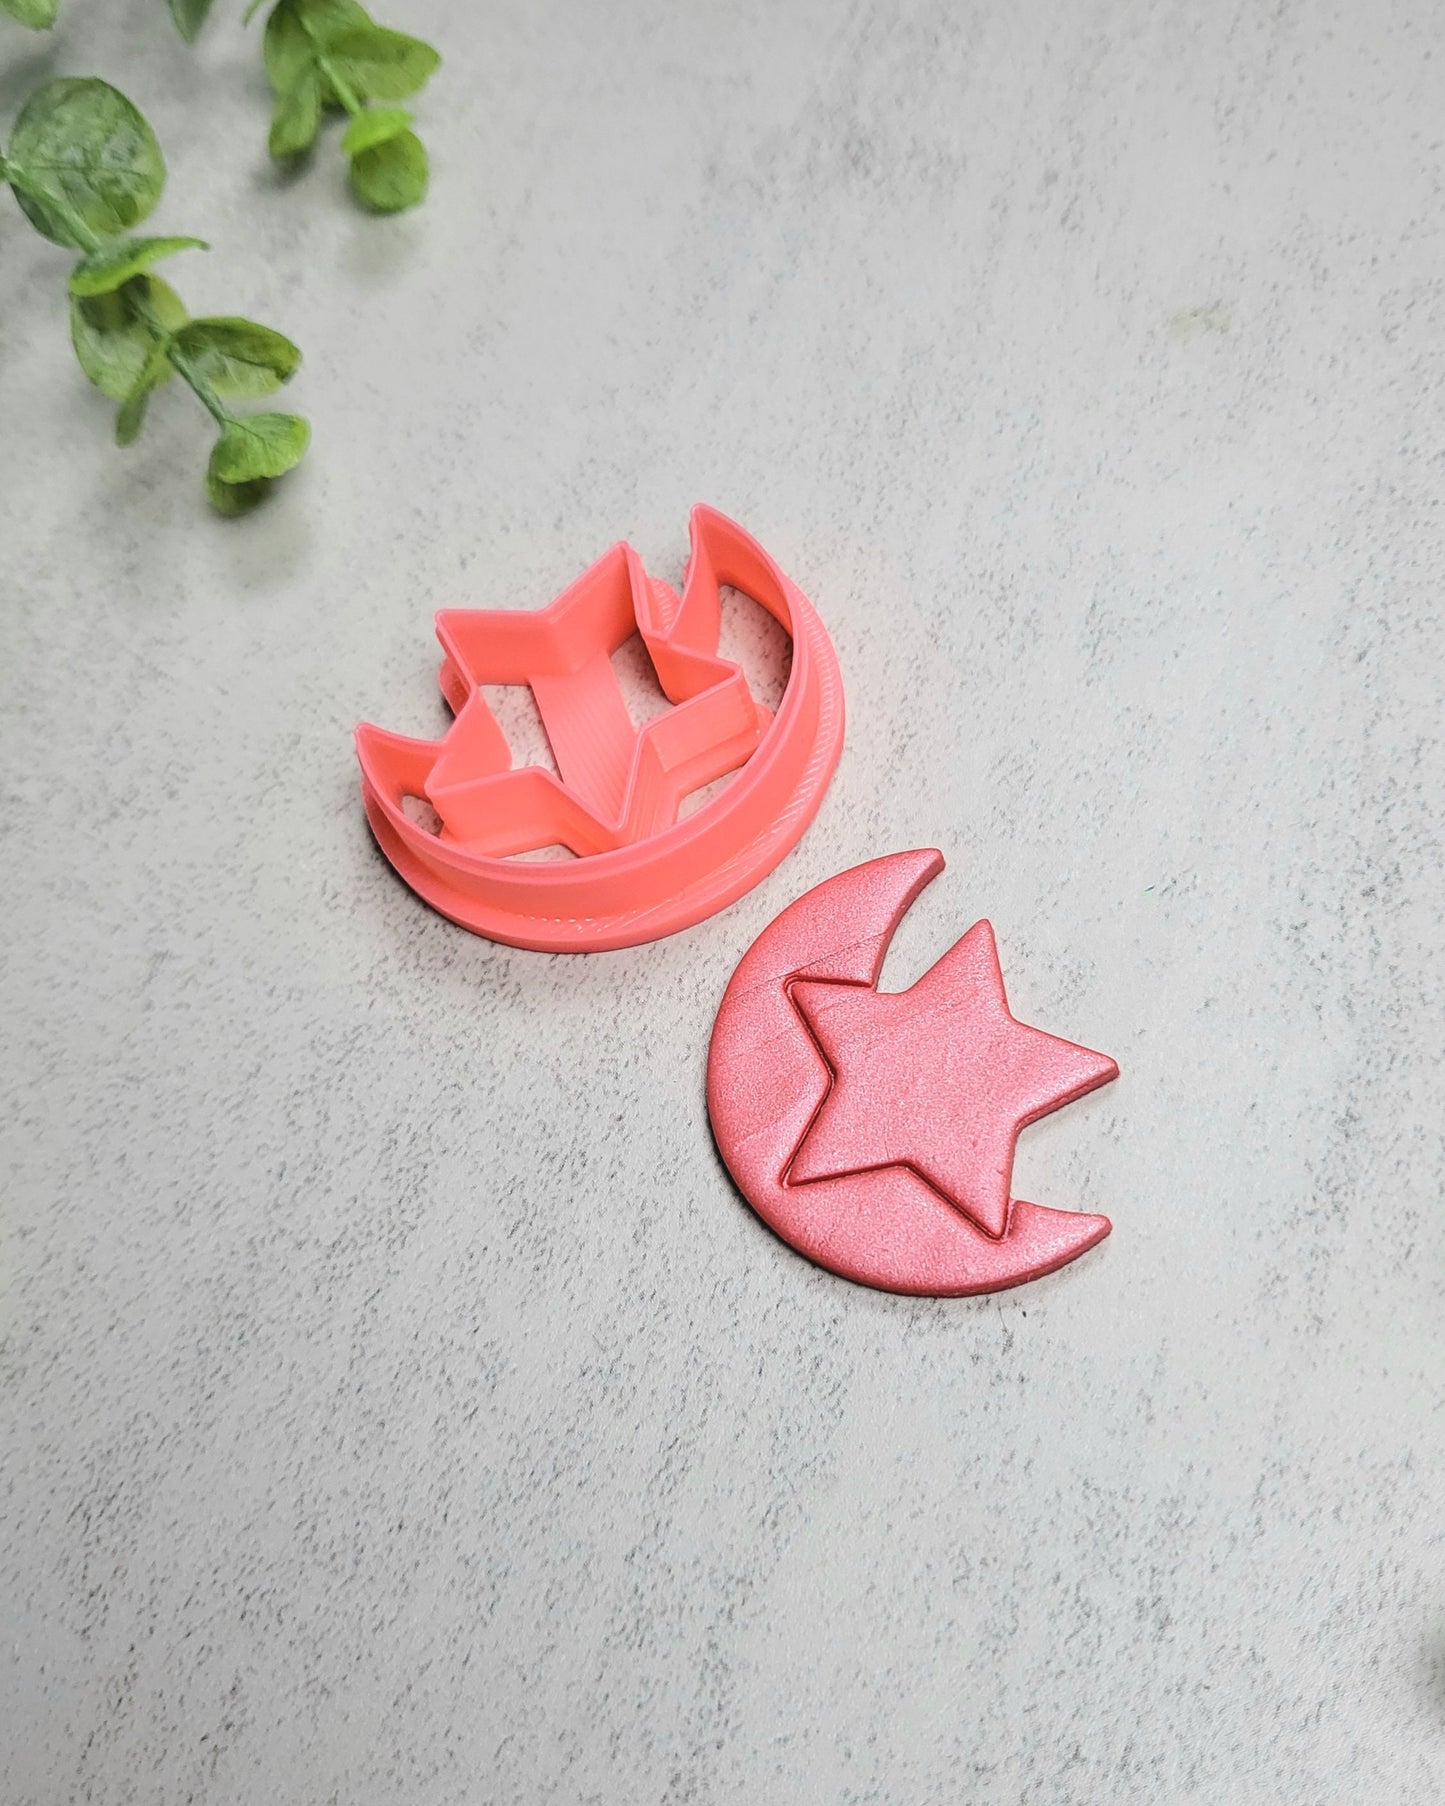 Moon and Star Polymer Clay Cutter, Moon Clay Cutter, Star Clay Cutter